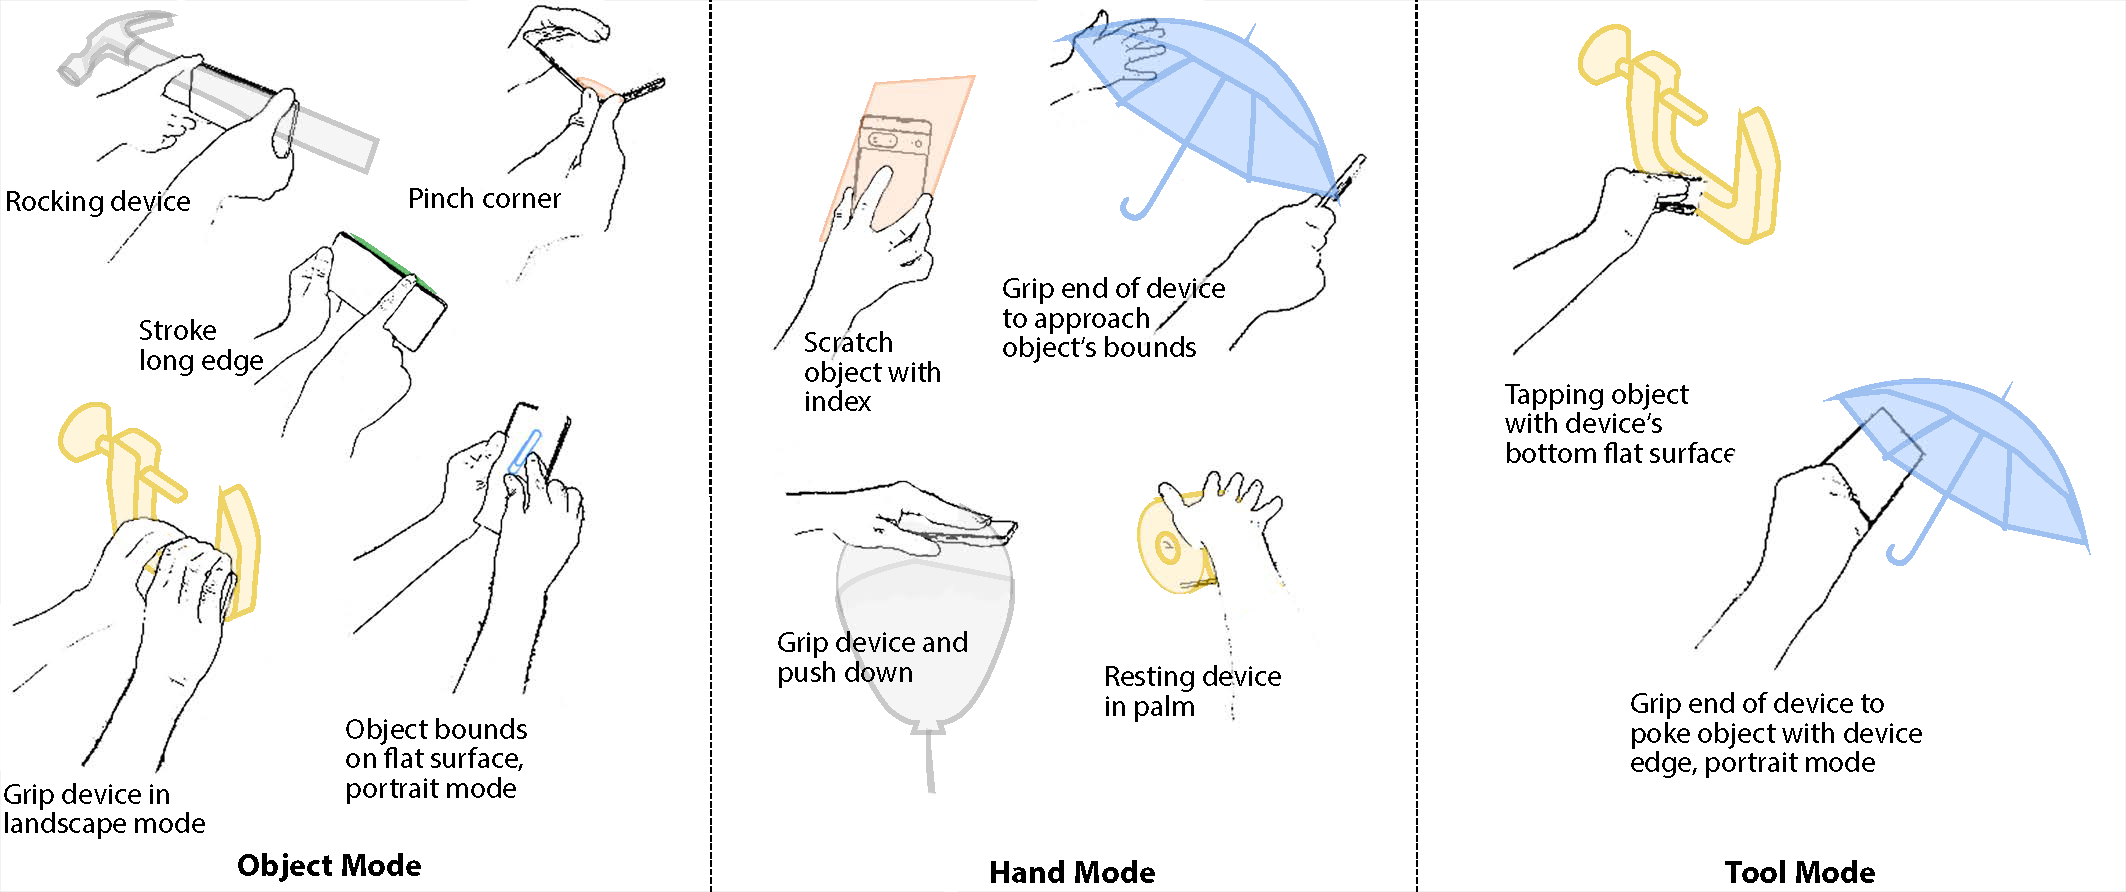 Exploring Mobile Devices as Haptic Interfaces for Mixed Reality